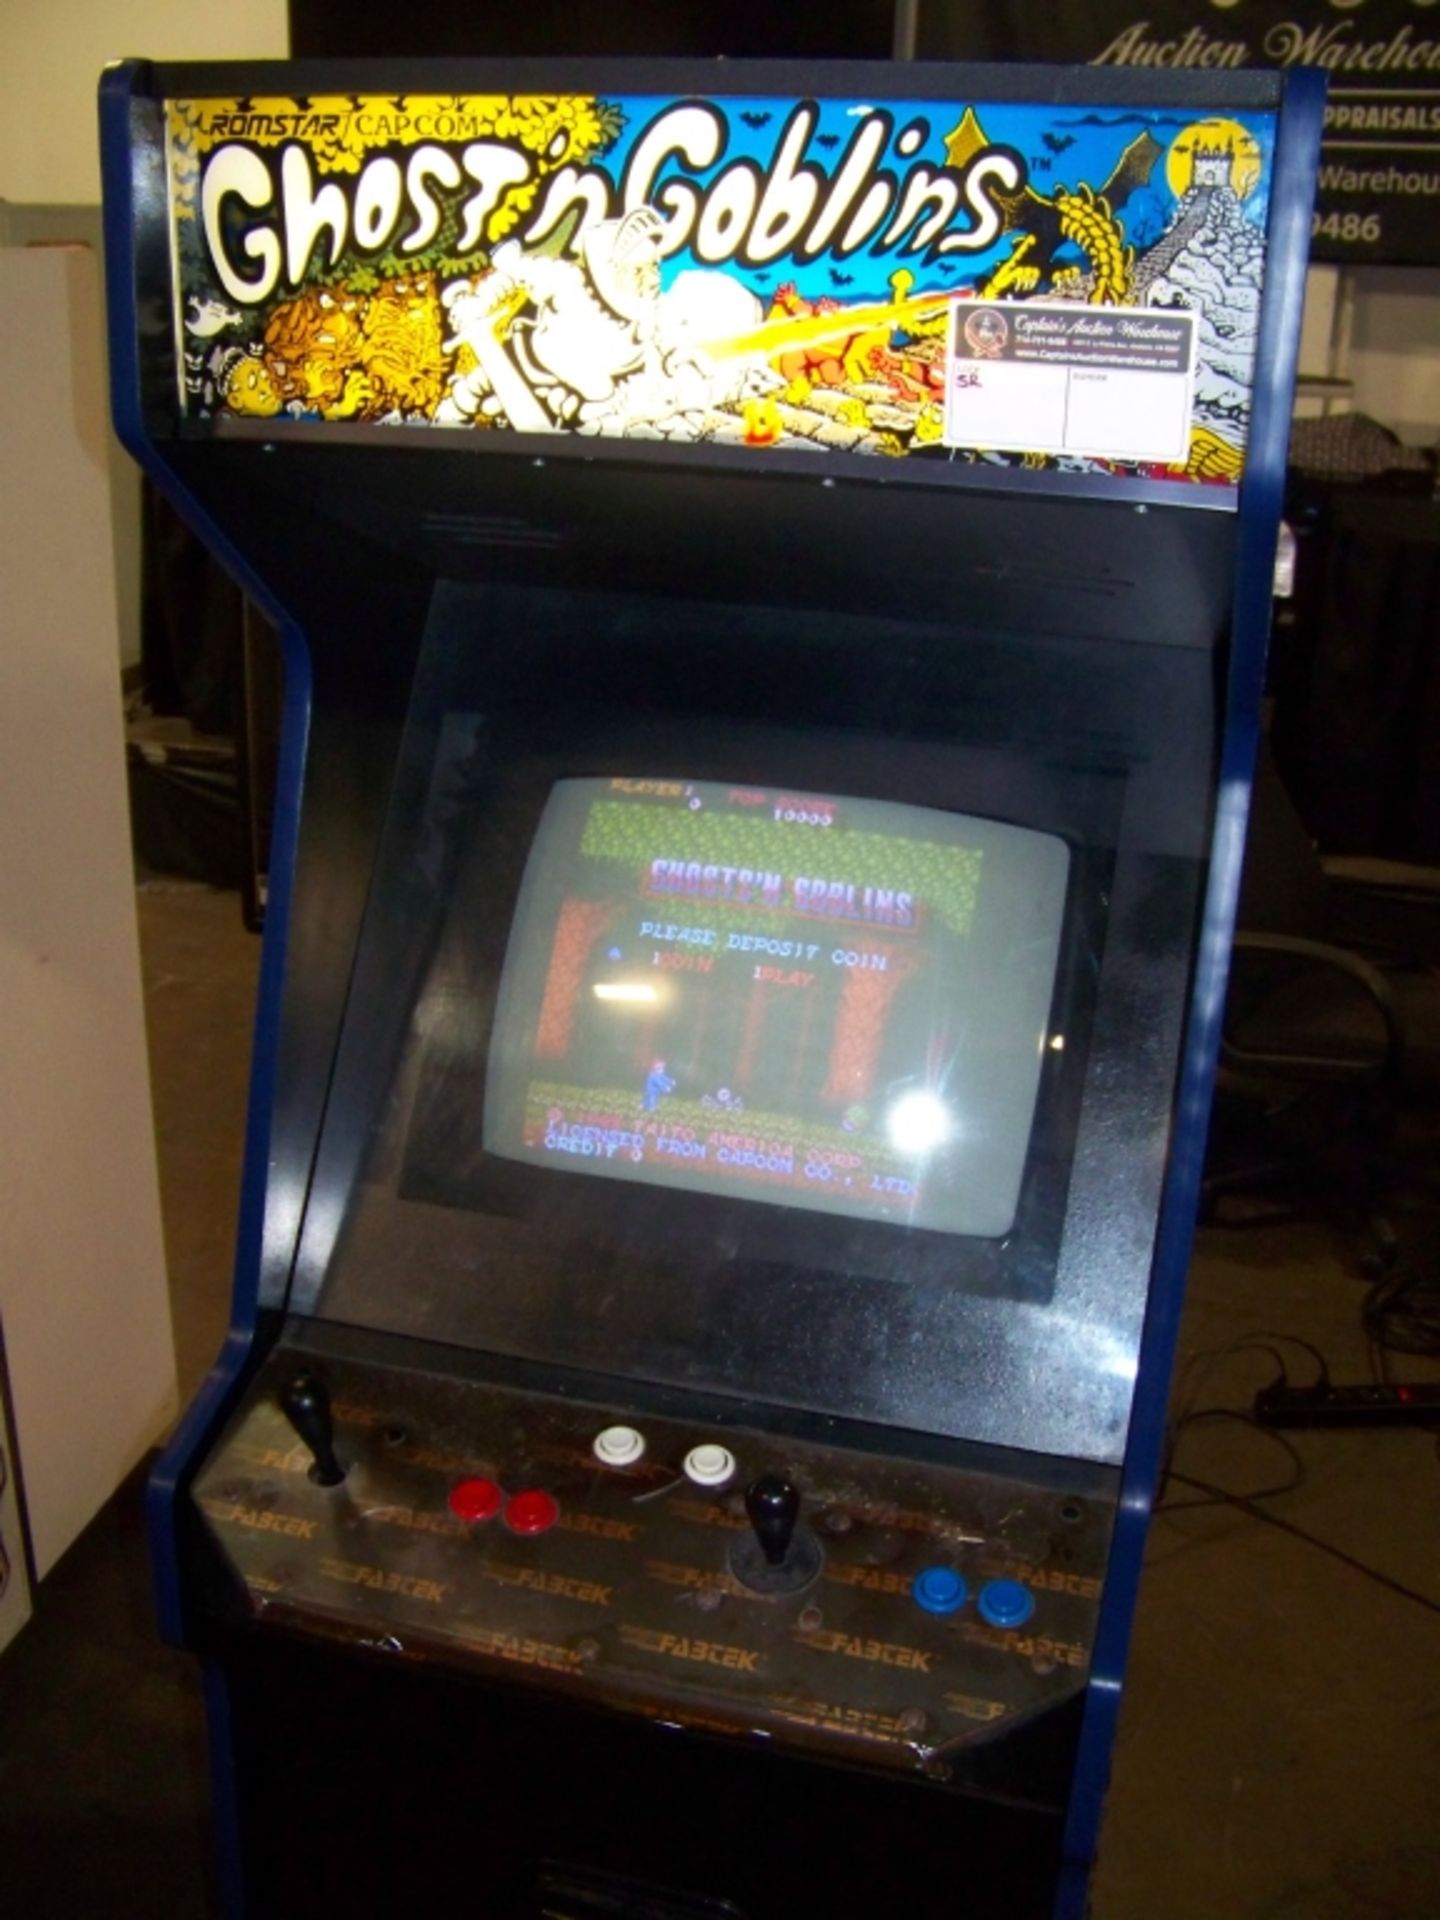 GHOSTS & GOBLINS CLASSIC UPRIGHT ARCADE 19"" DYNAMO - Image 3 of 5